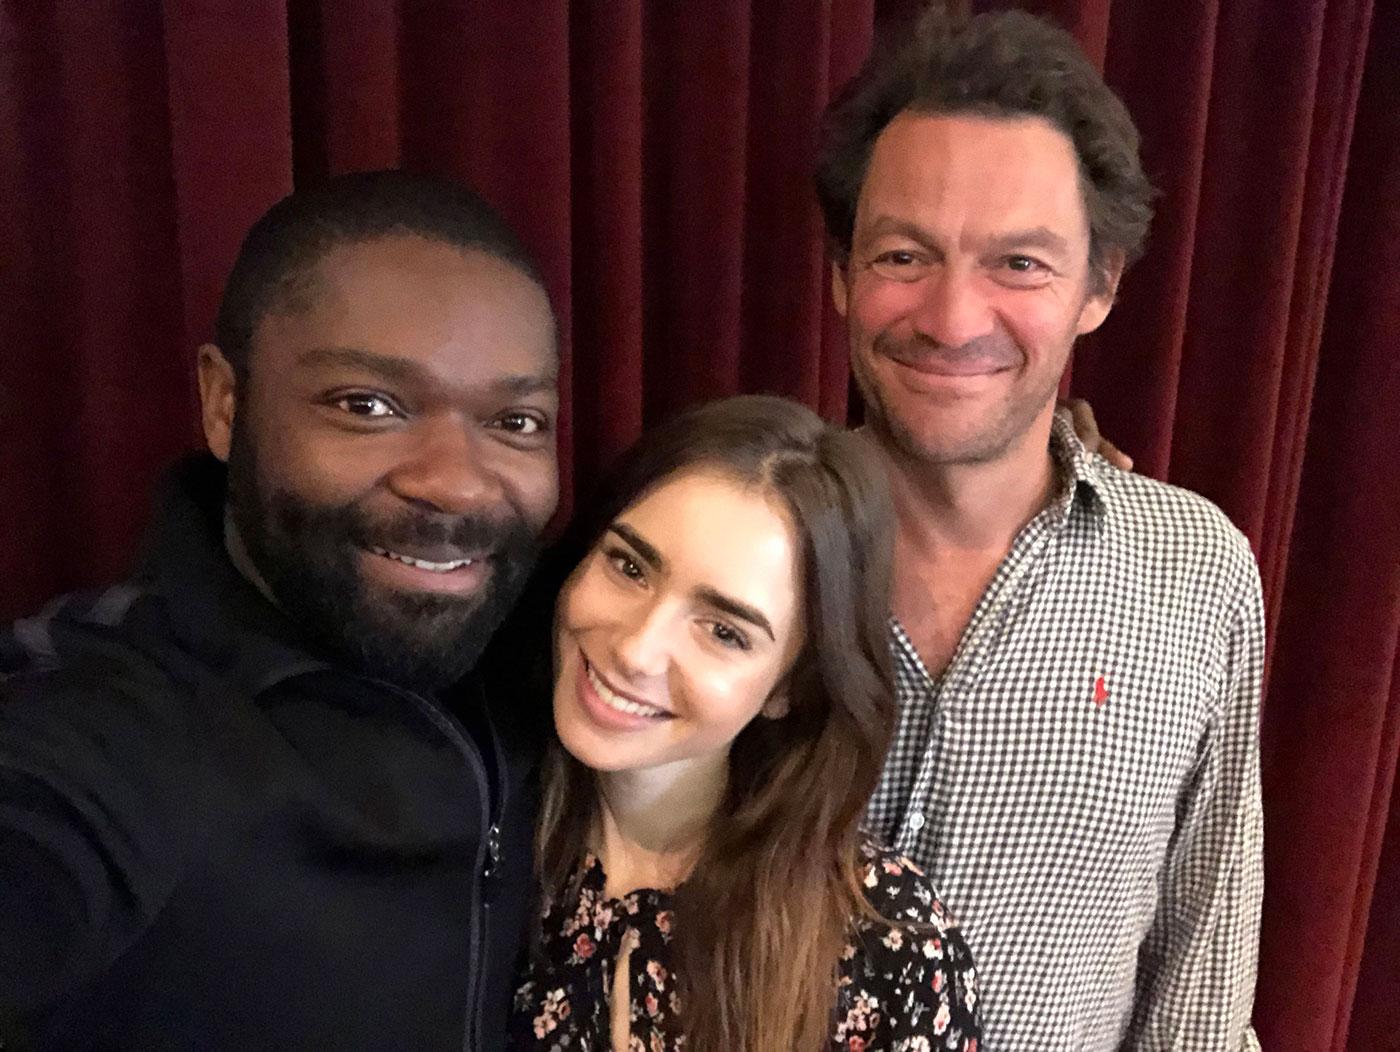 David Oyelowo, Lily Collins, and Dominic West while filming 'Les Misérables.' Photo: BBC/Lookout Point/David Oyelowo